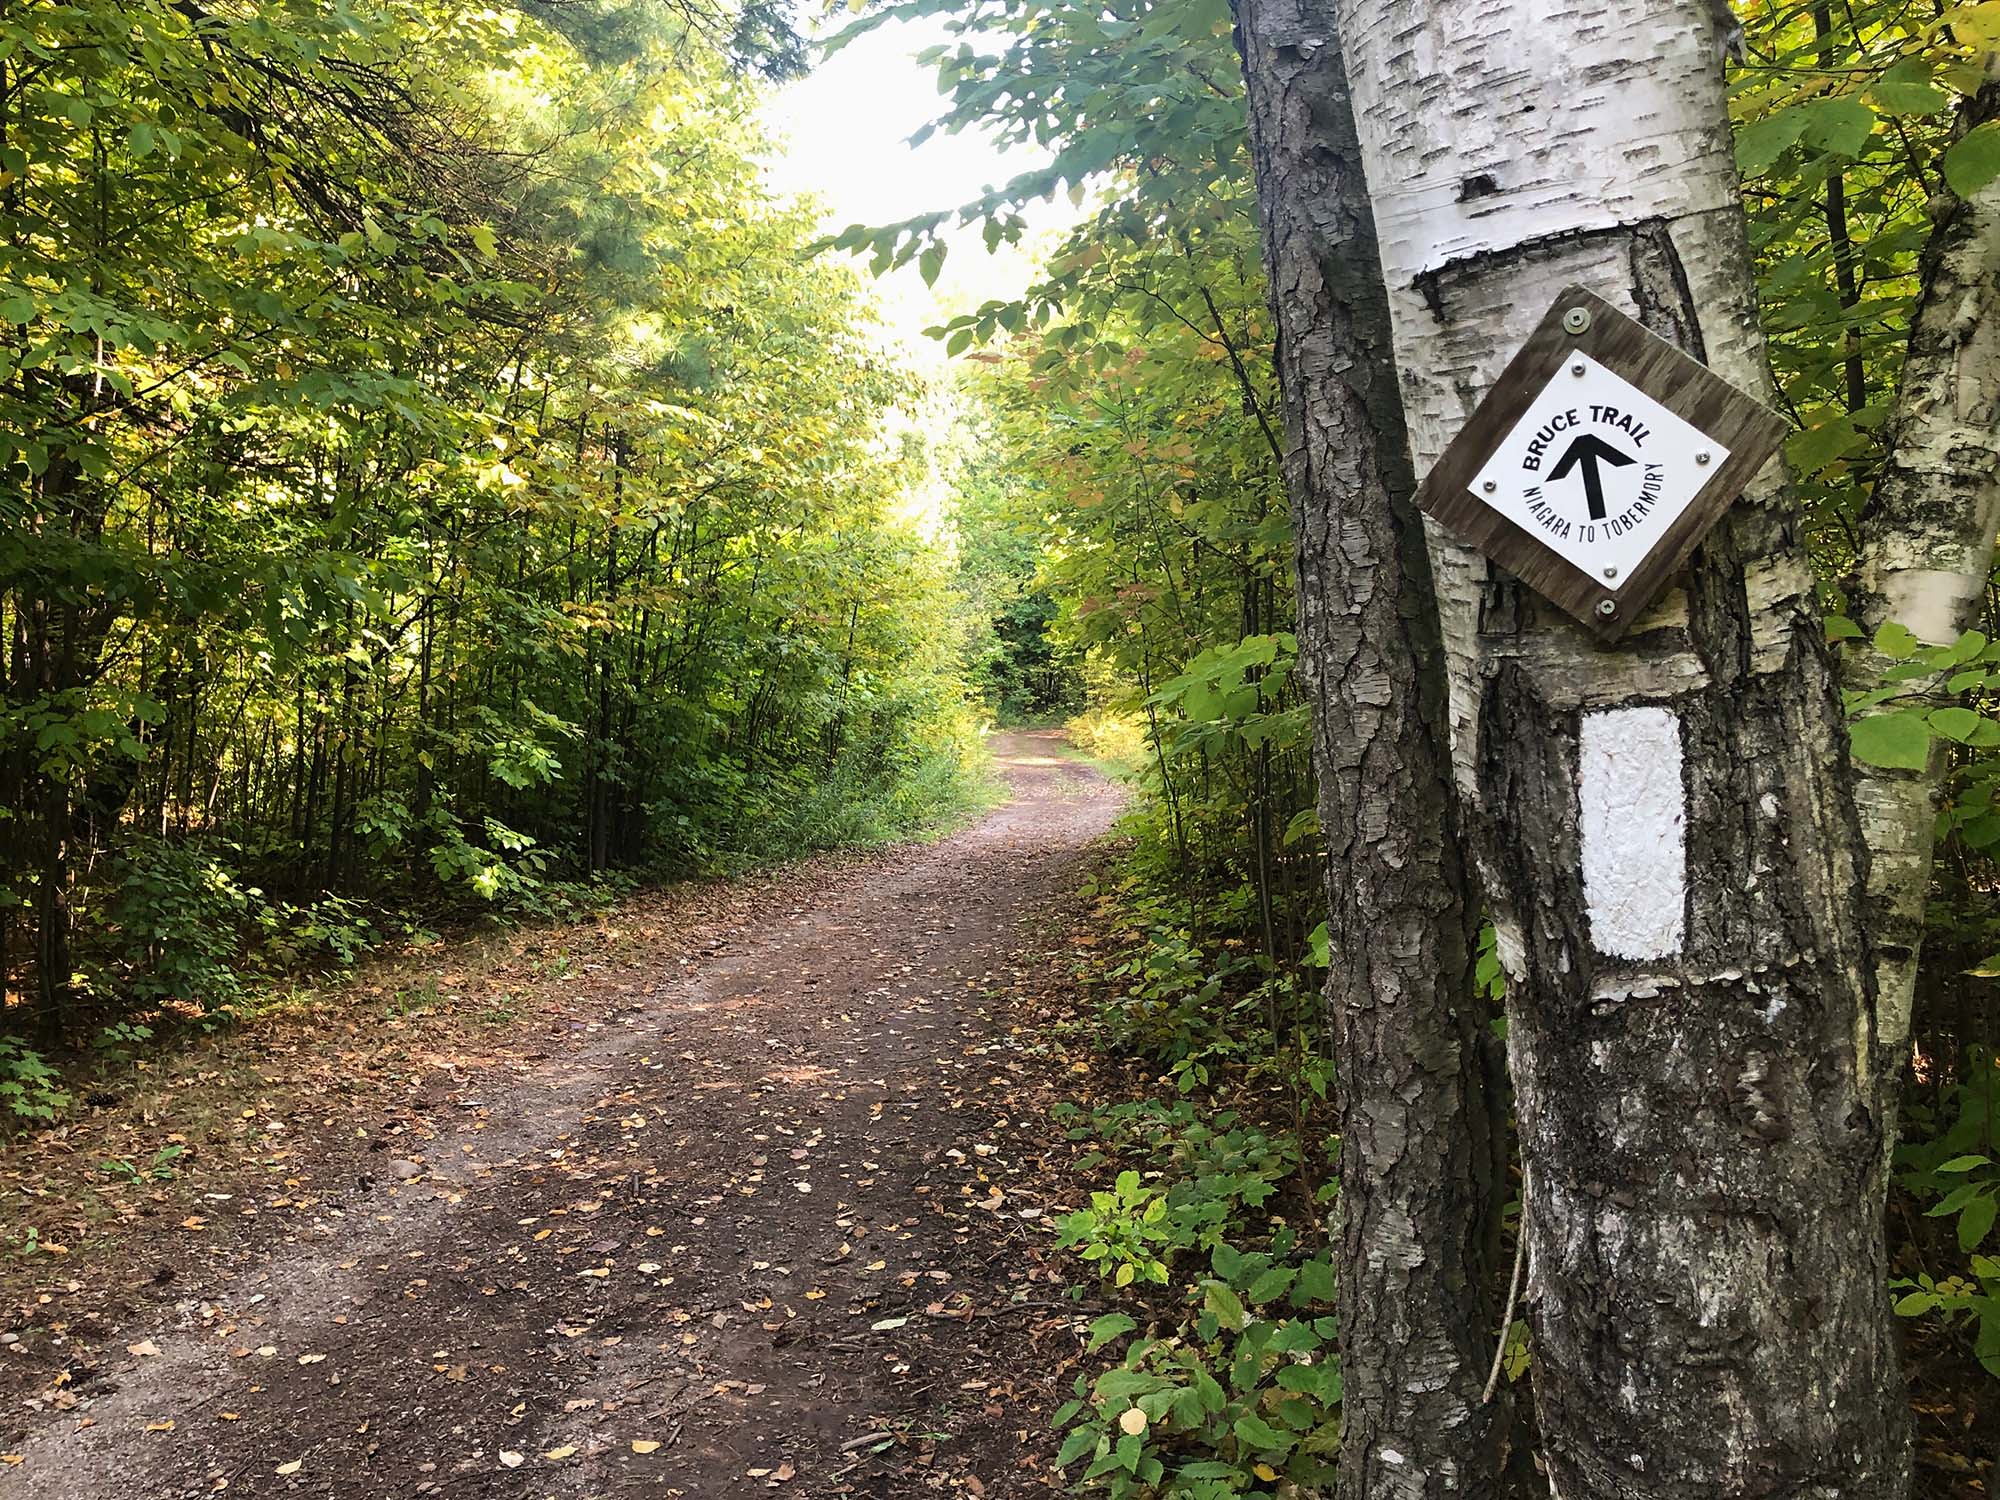 A trail through the forest with a Bruce Trail marker pointing the way